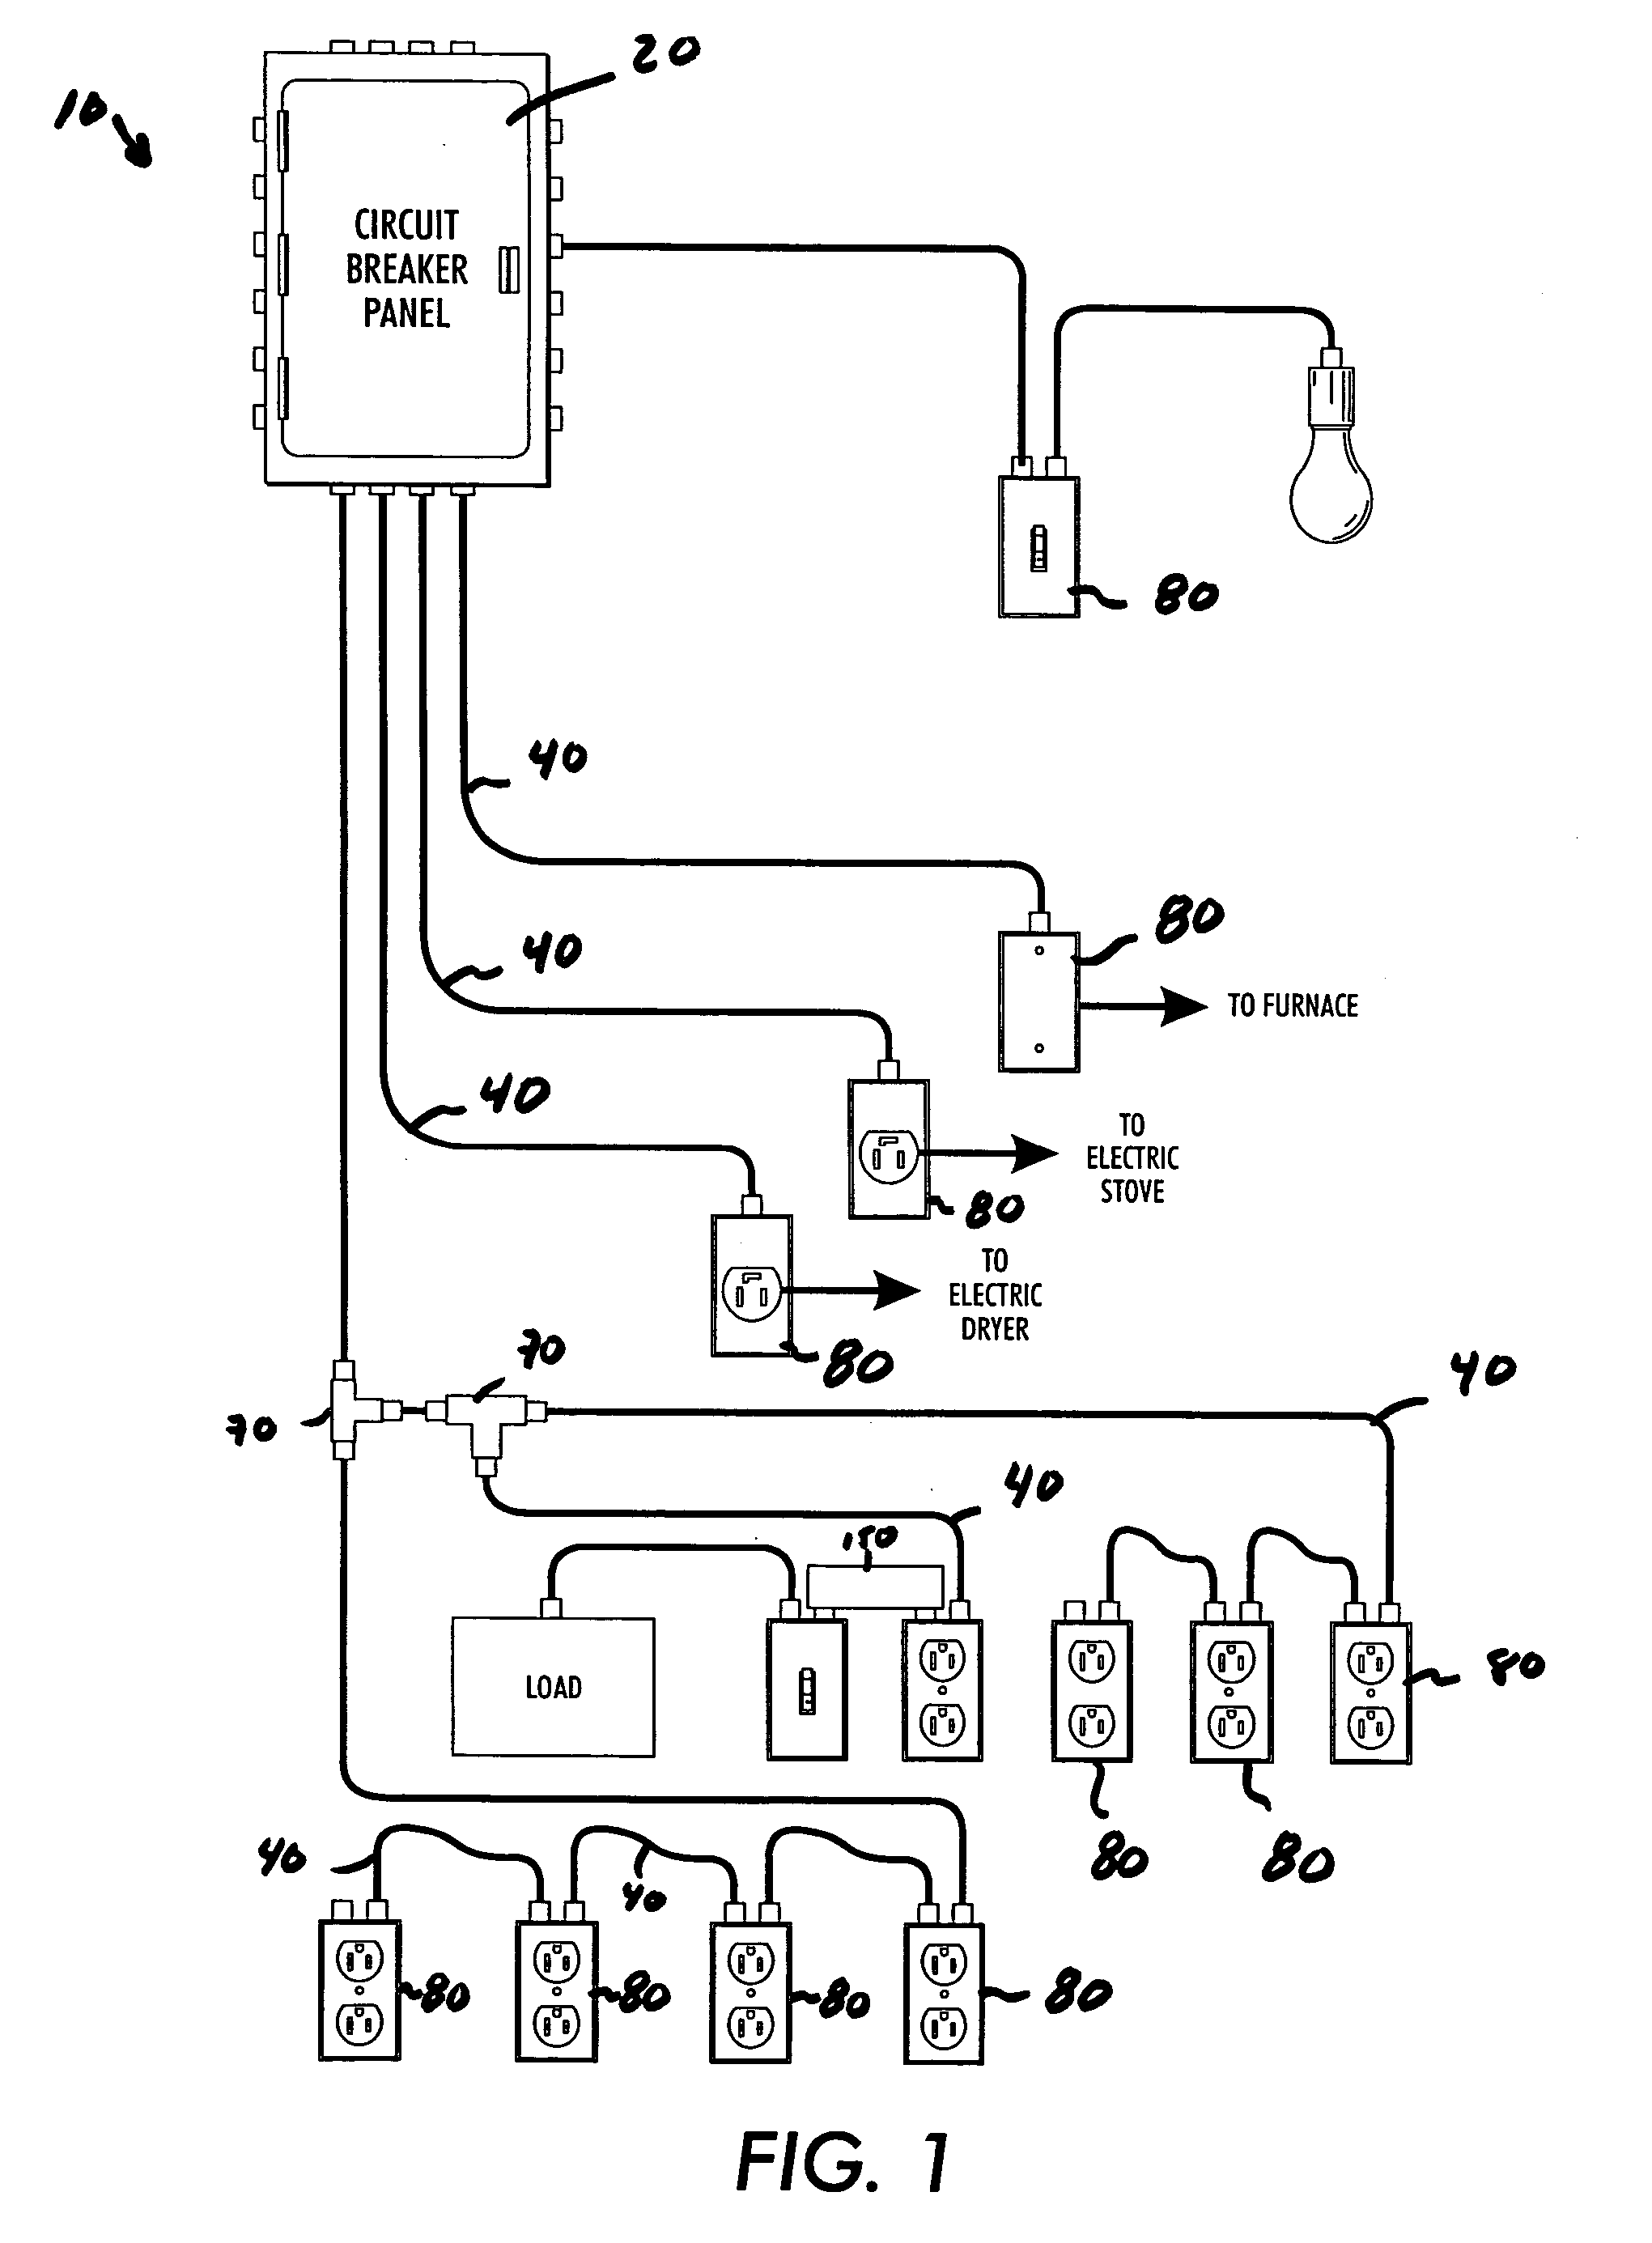 Module with interconnected male power input receptacle, female power output receptable and female load receptable